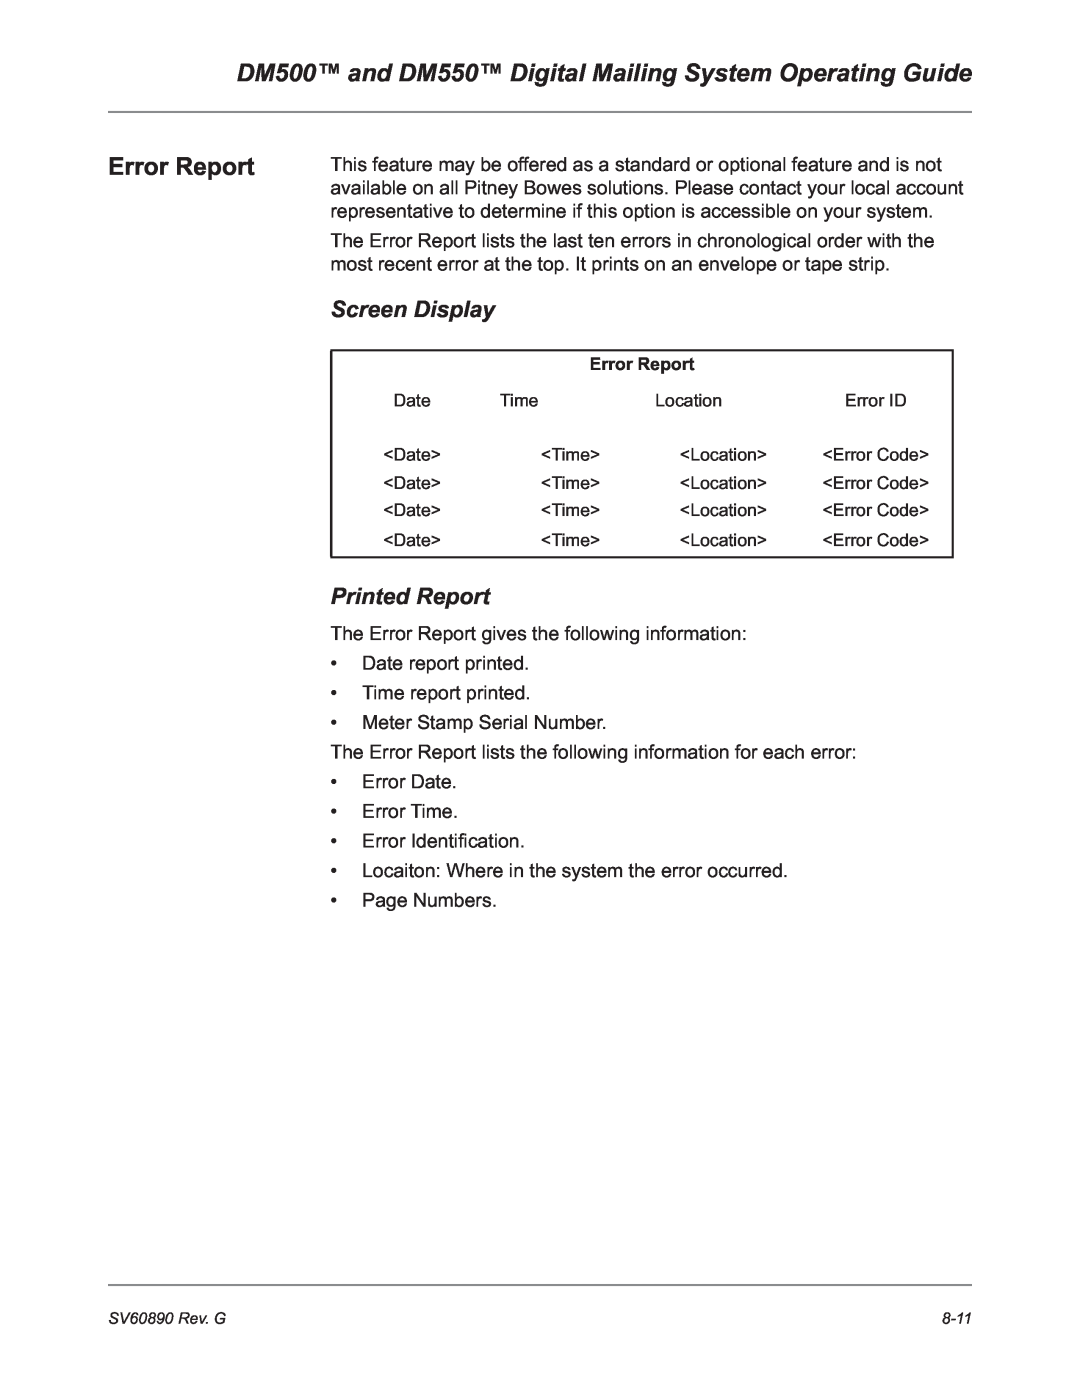 Pitney Bowes manual Error Report, DM500 and DM550 Digital Mailing System Operating Guide, Screen Display, Printed Report 